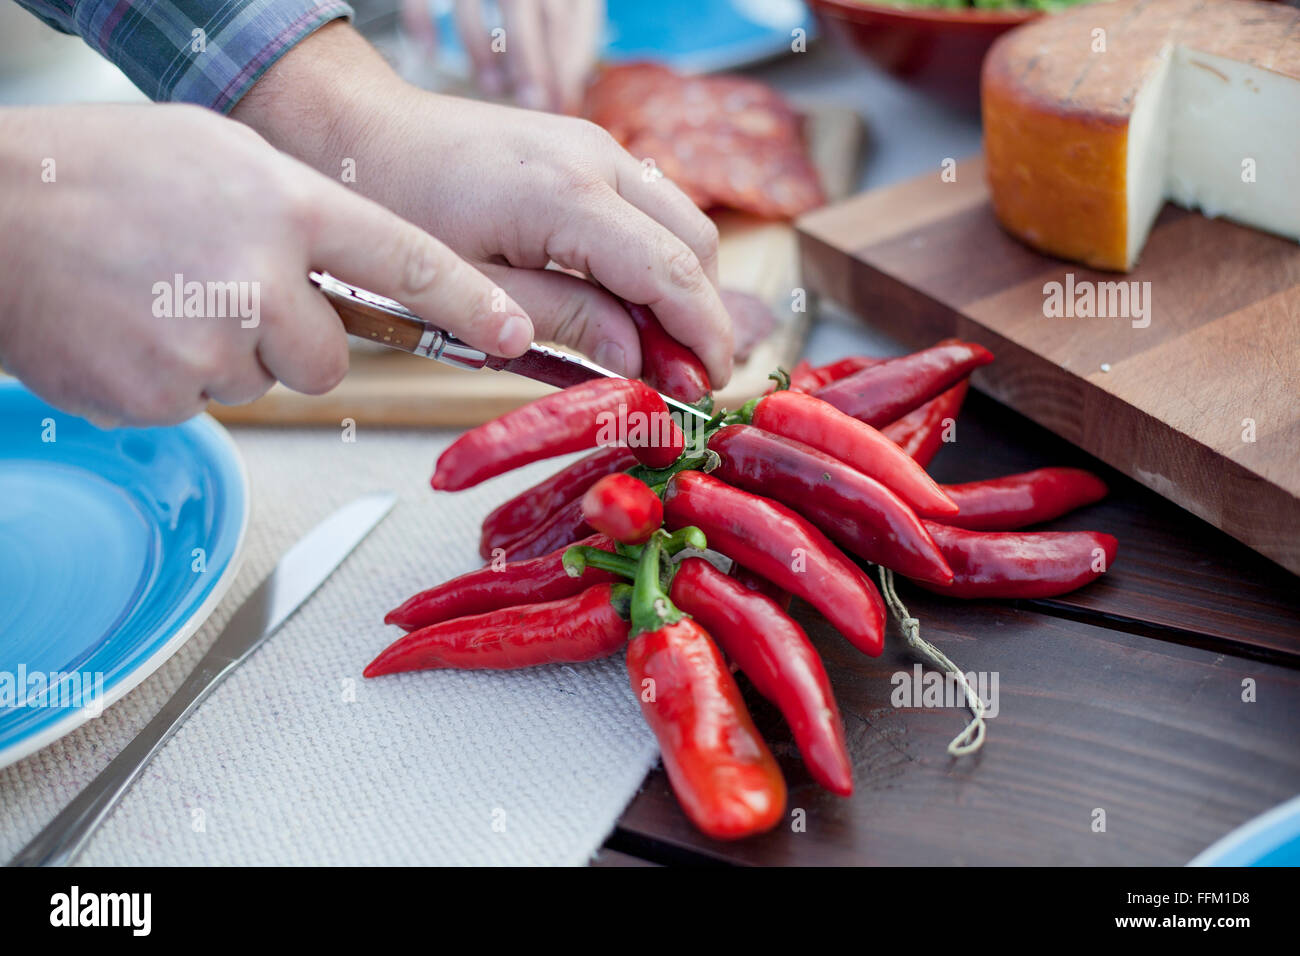 Person on garden party slicing red pepper Stock Photo